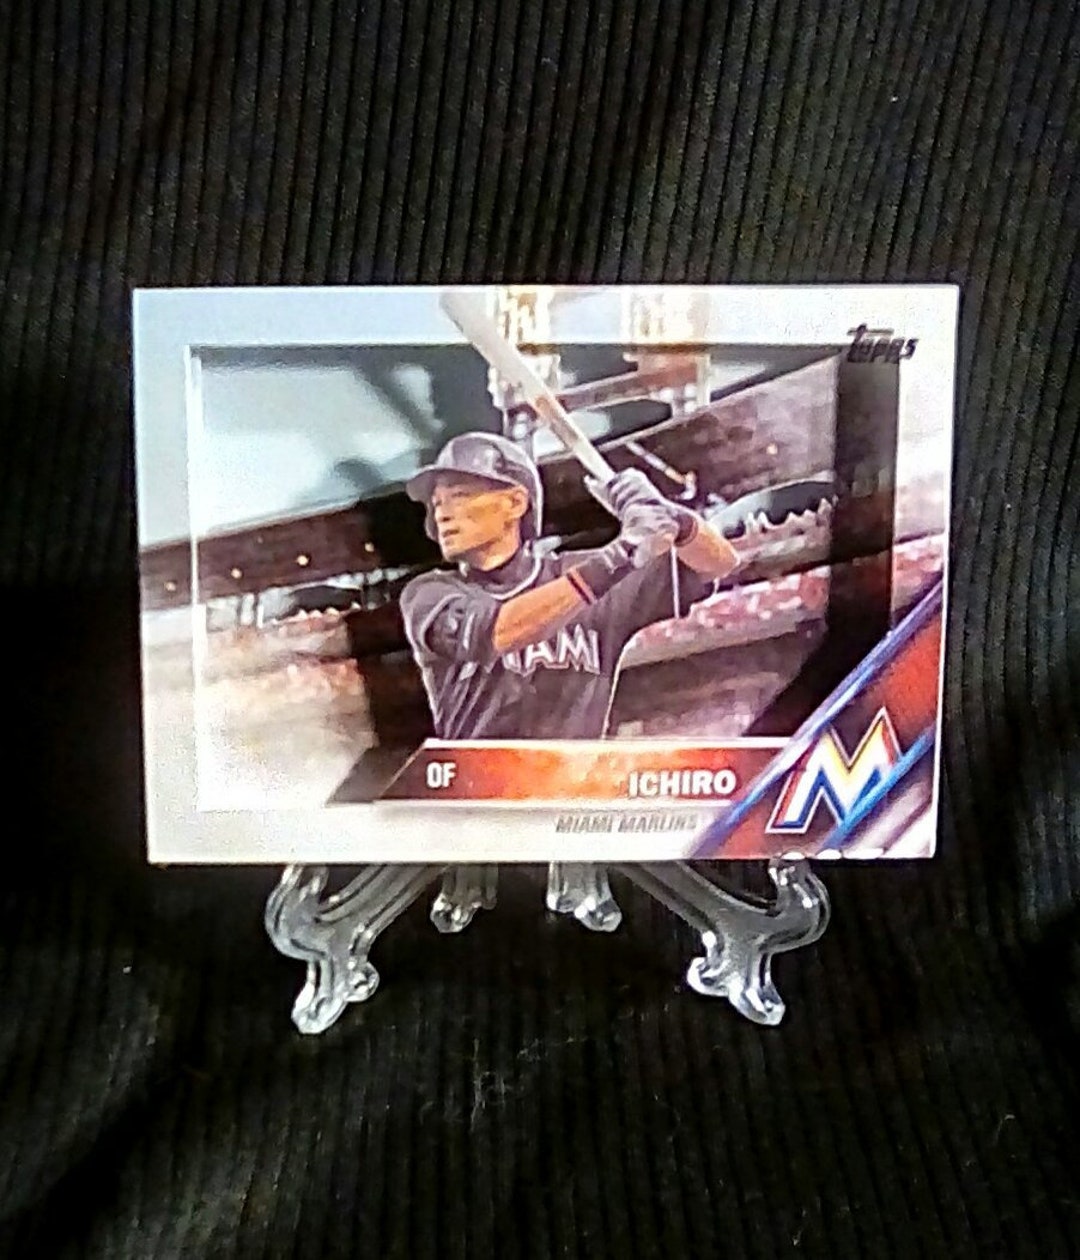 Awesome Tri-level 3D Baseball Card of Miami Marlins and 